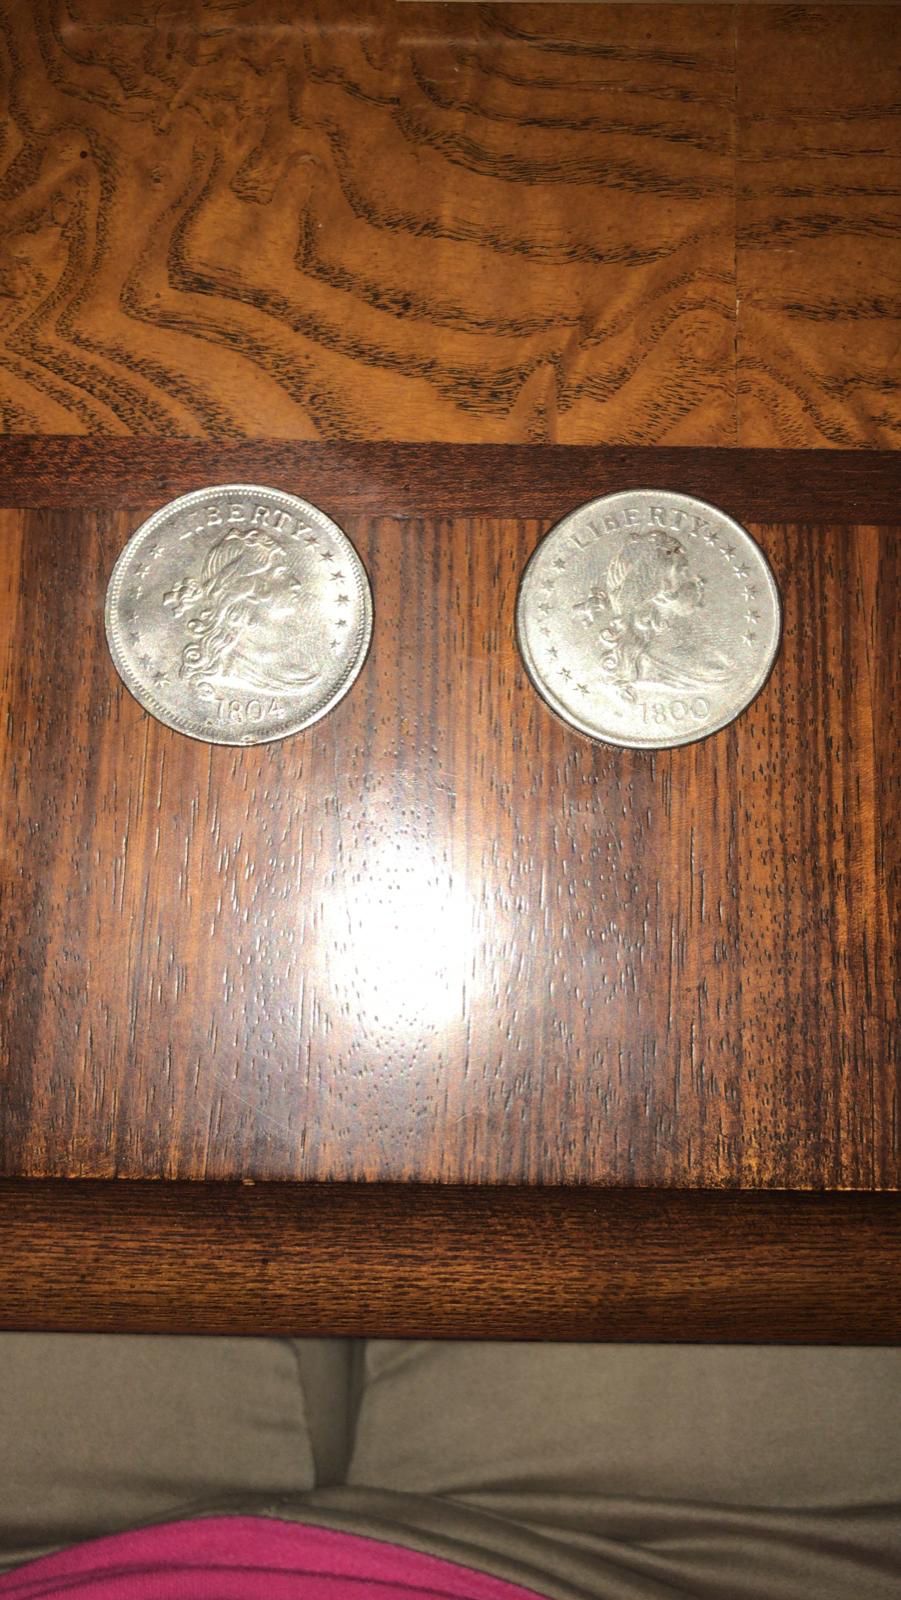 Year 1800 dollar coin TRADES ACCEPTED